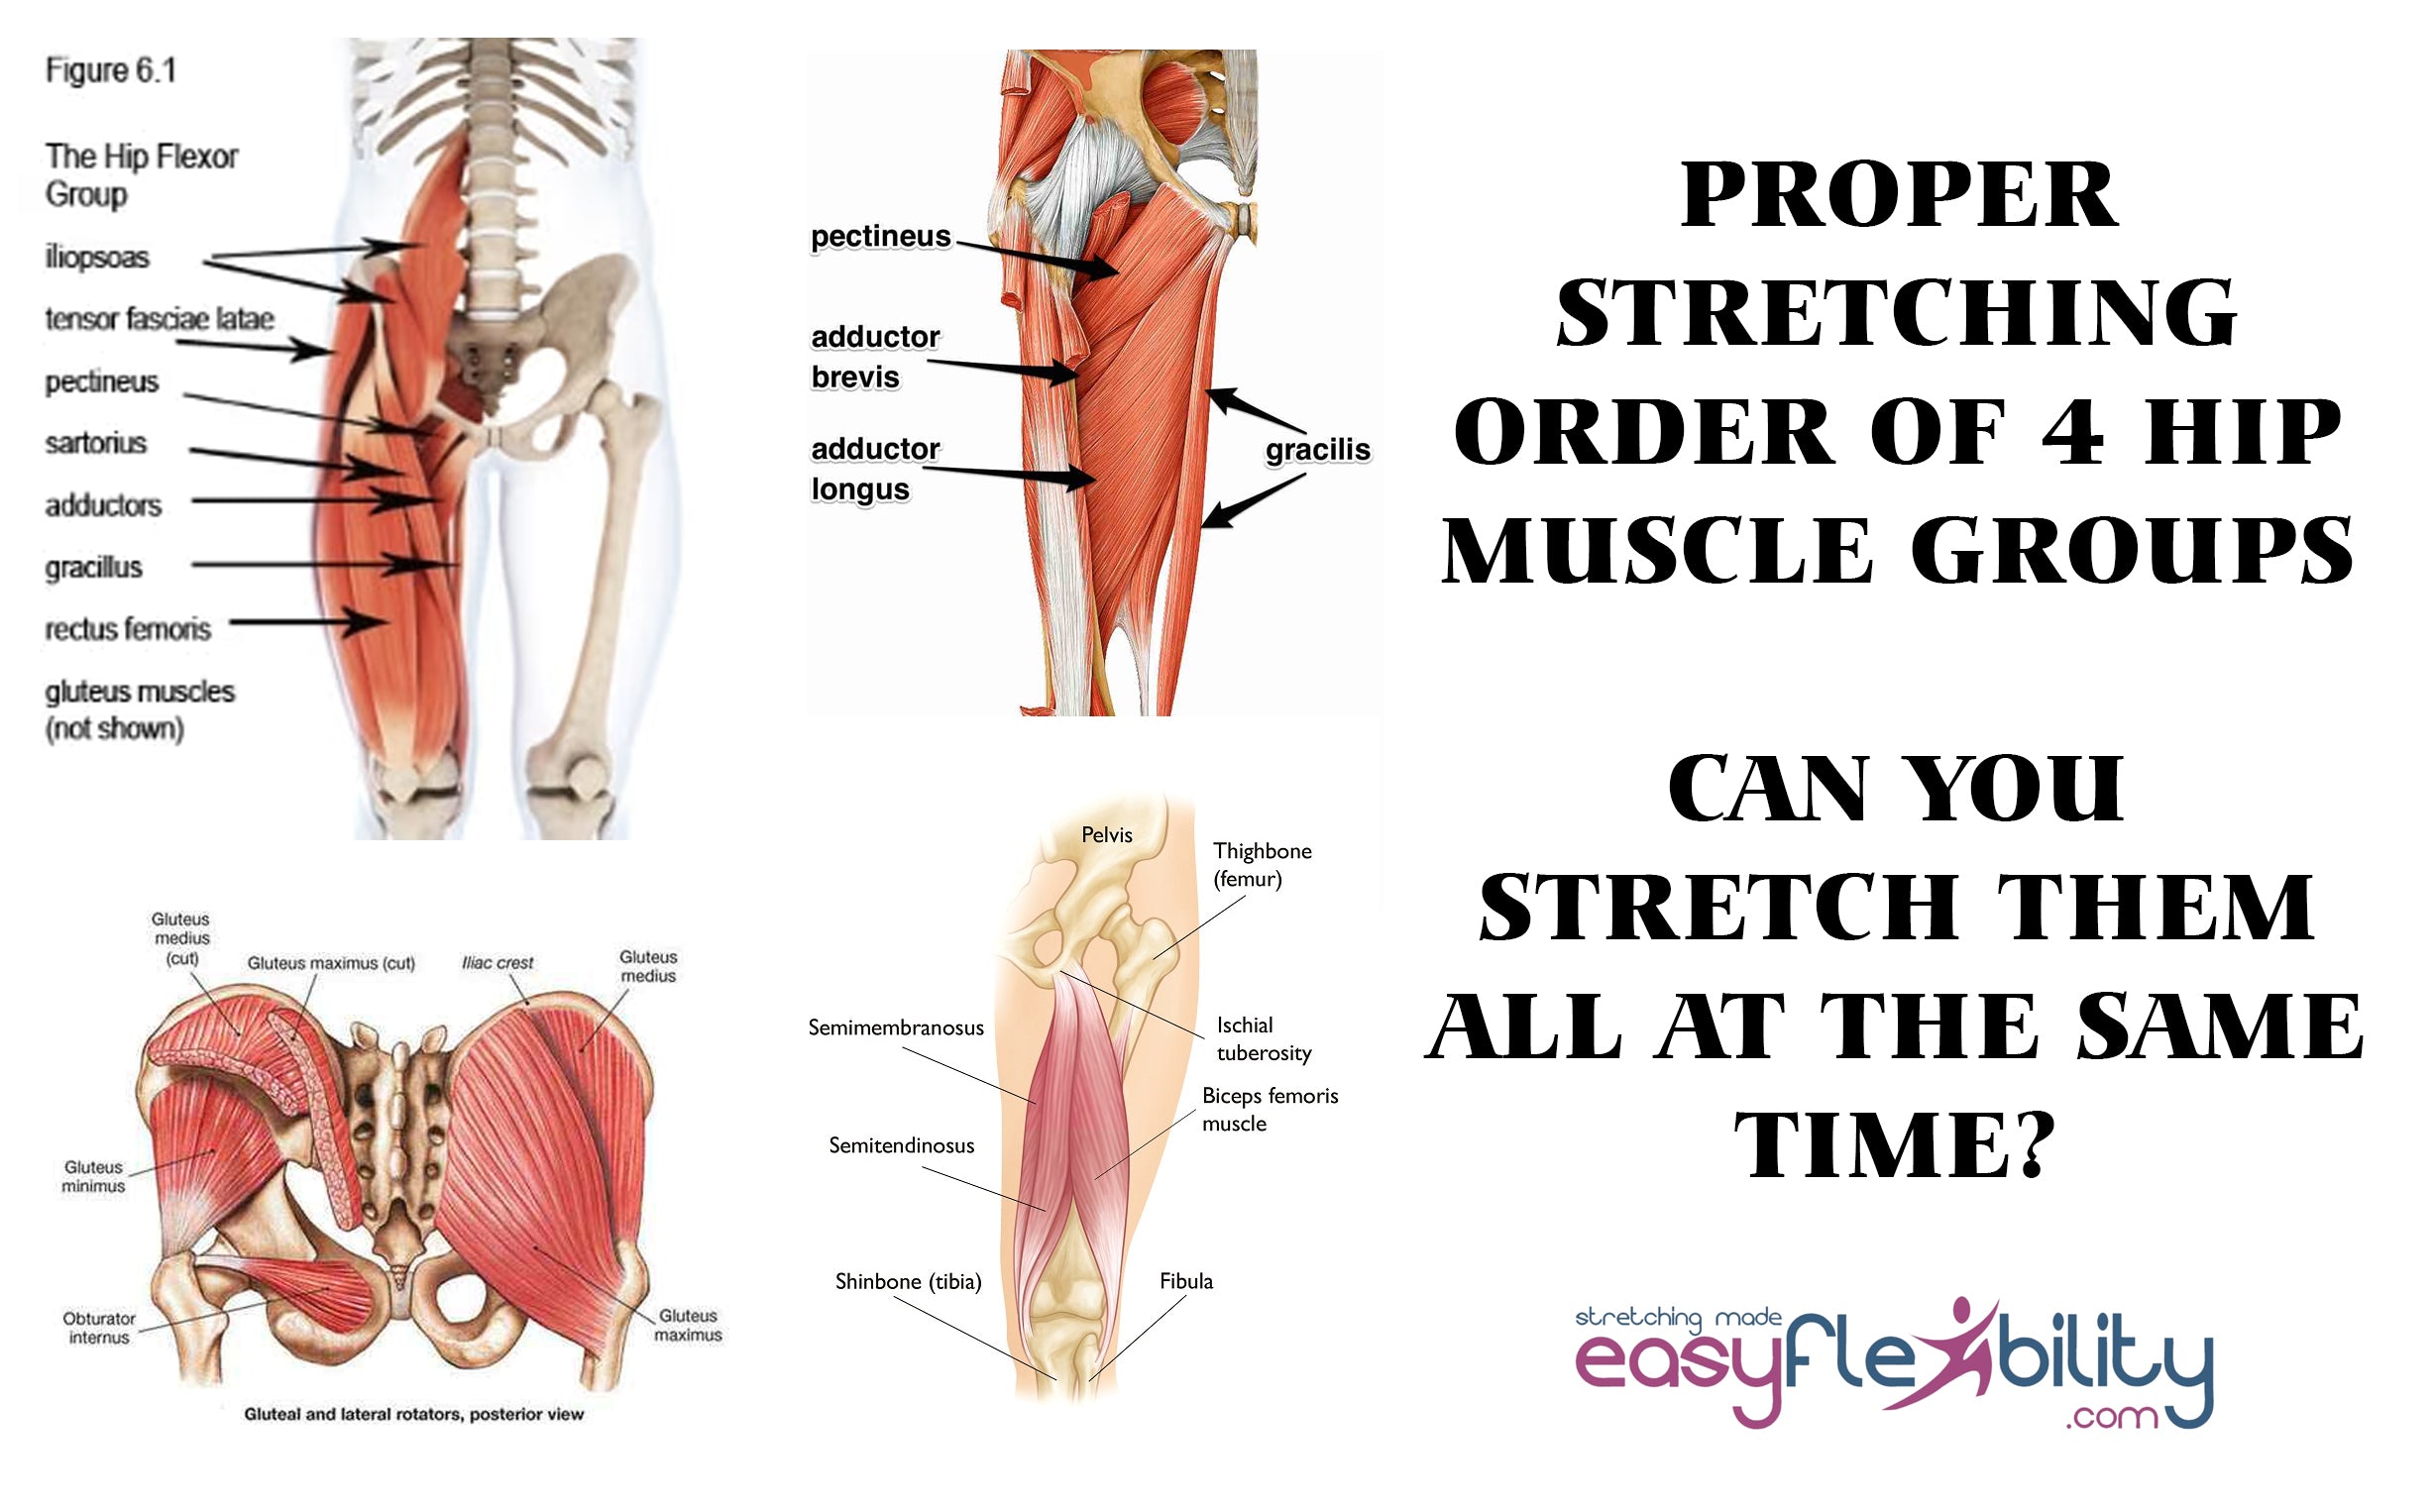 Proper Stretching Order of 4 Hip Muscle Groups. Can You Stretch Them All At The Same Time?